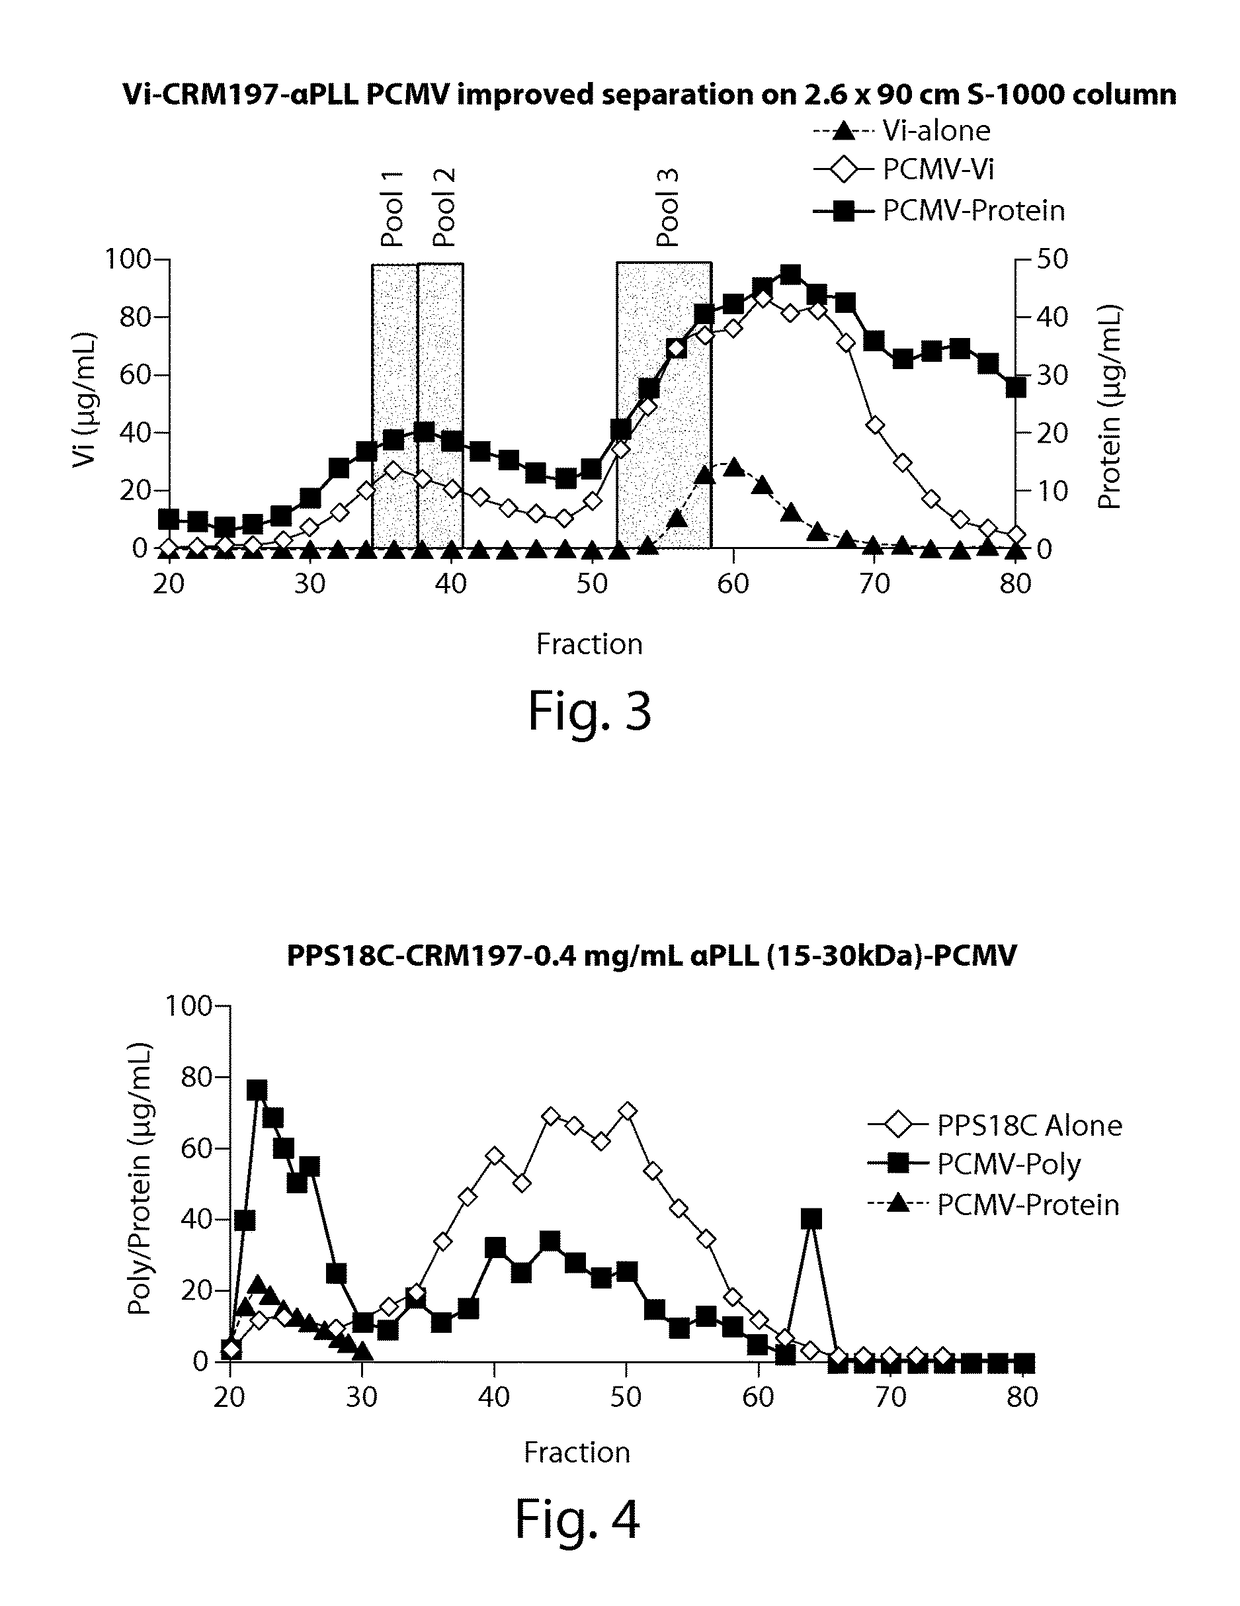 Protein matrix vaccine compositions including polycations